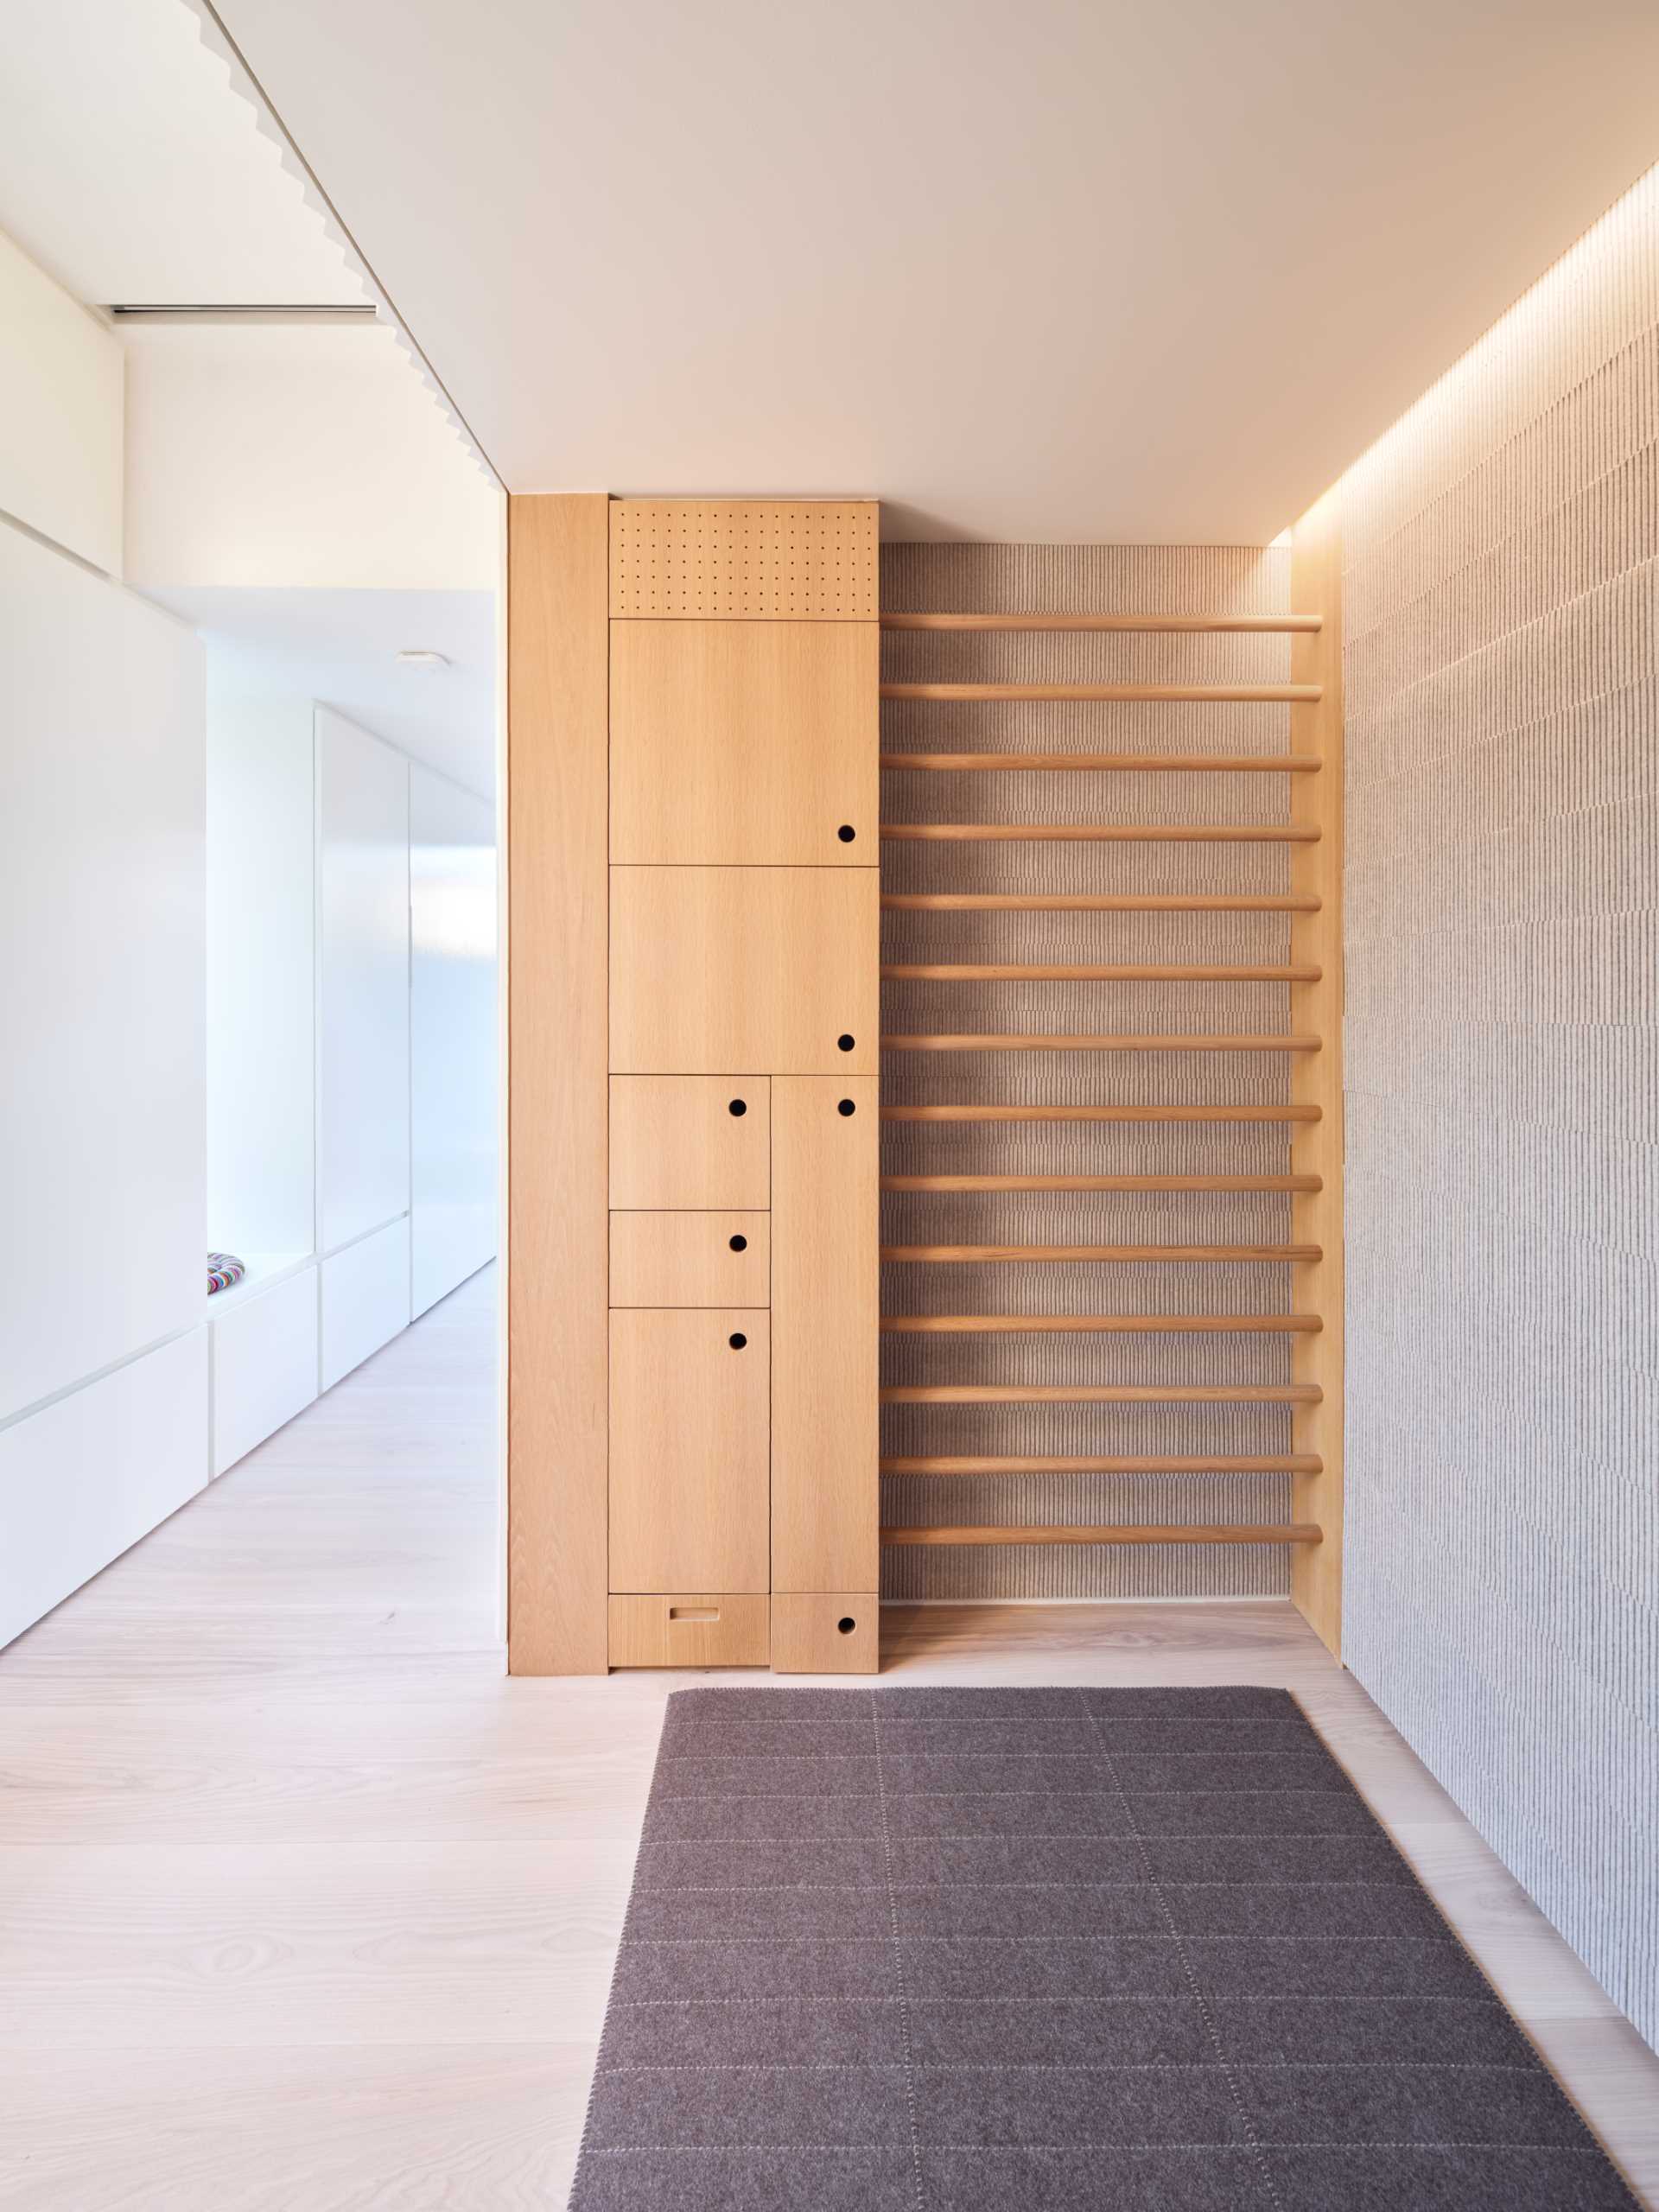 A wellness room for stretching and meditation, that's lined with softly ridged millwork that conceals storage cabinet to accommodate yoga equipment.